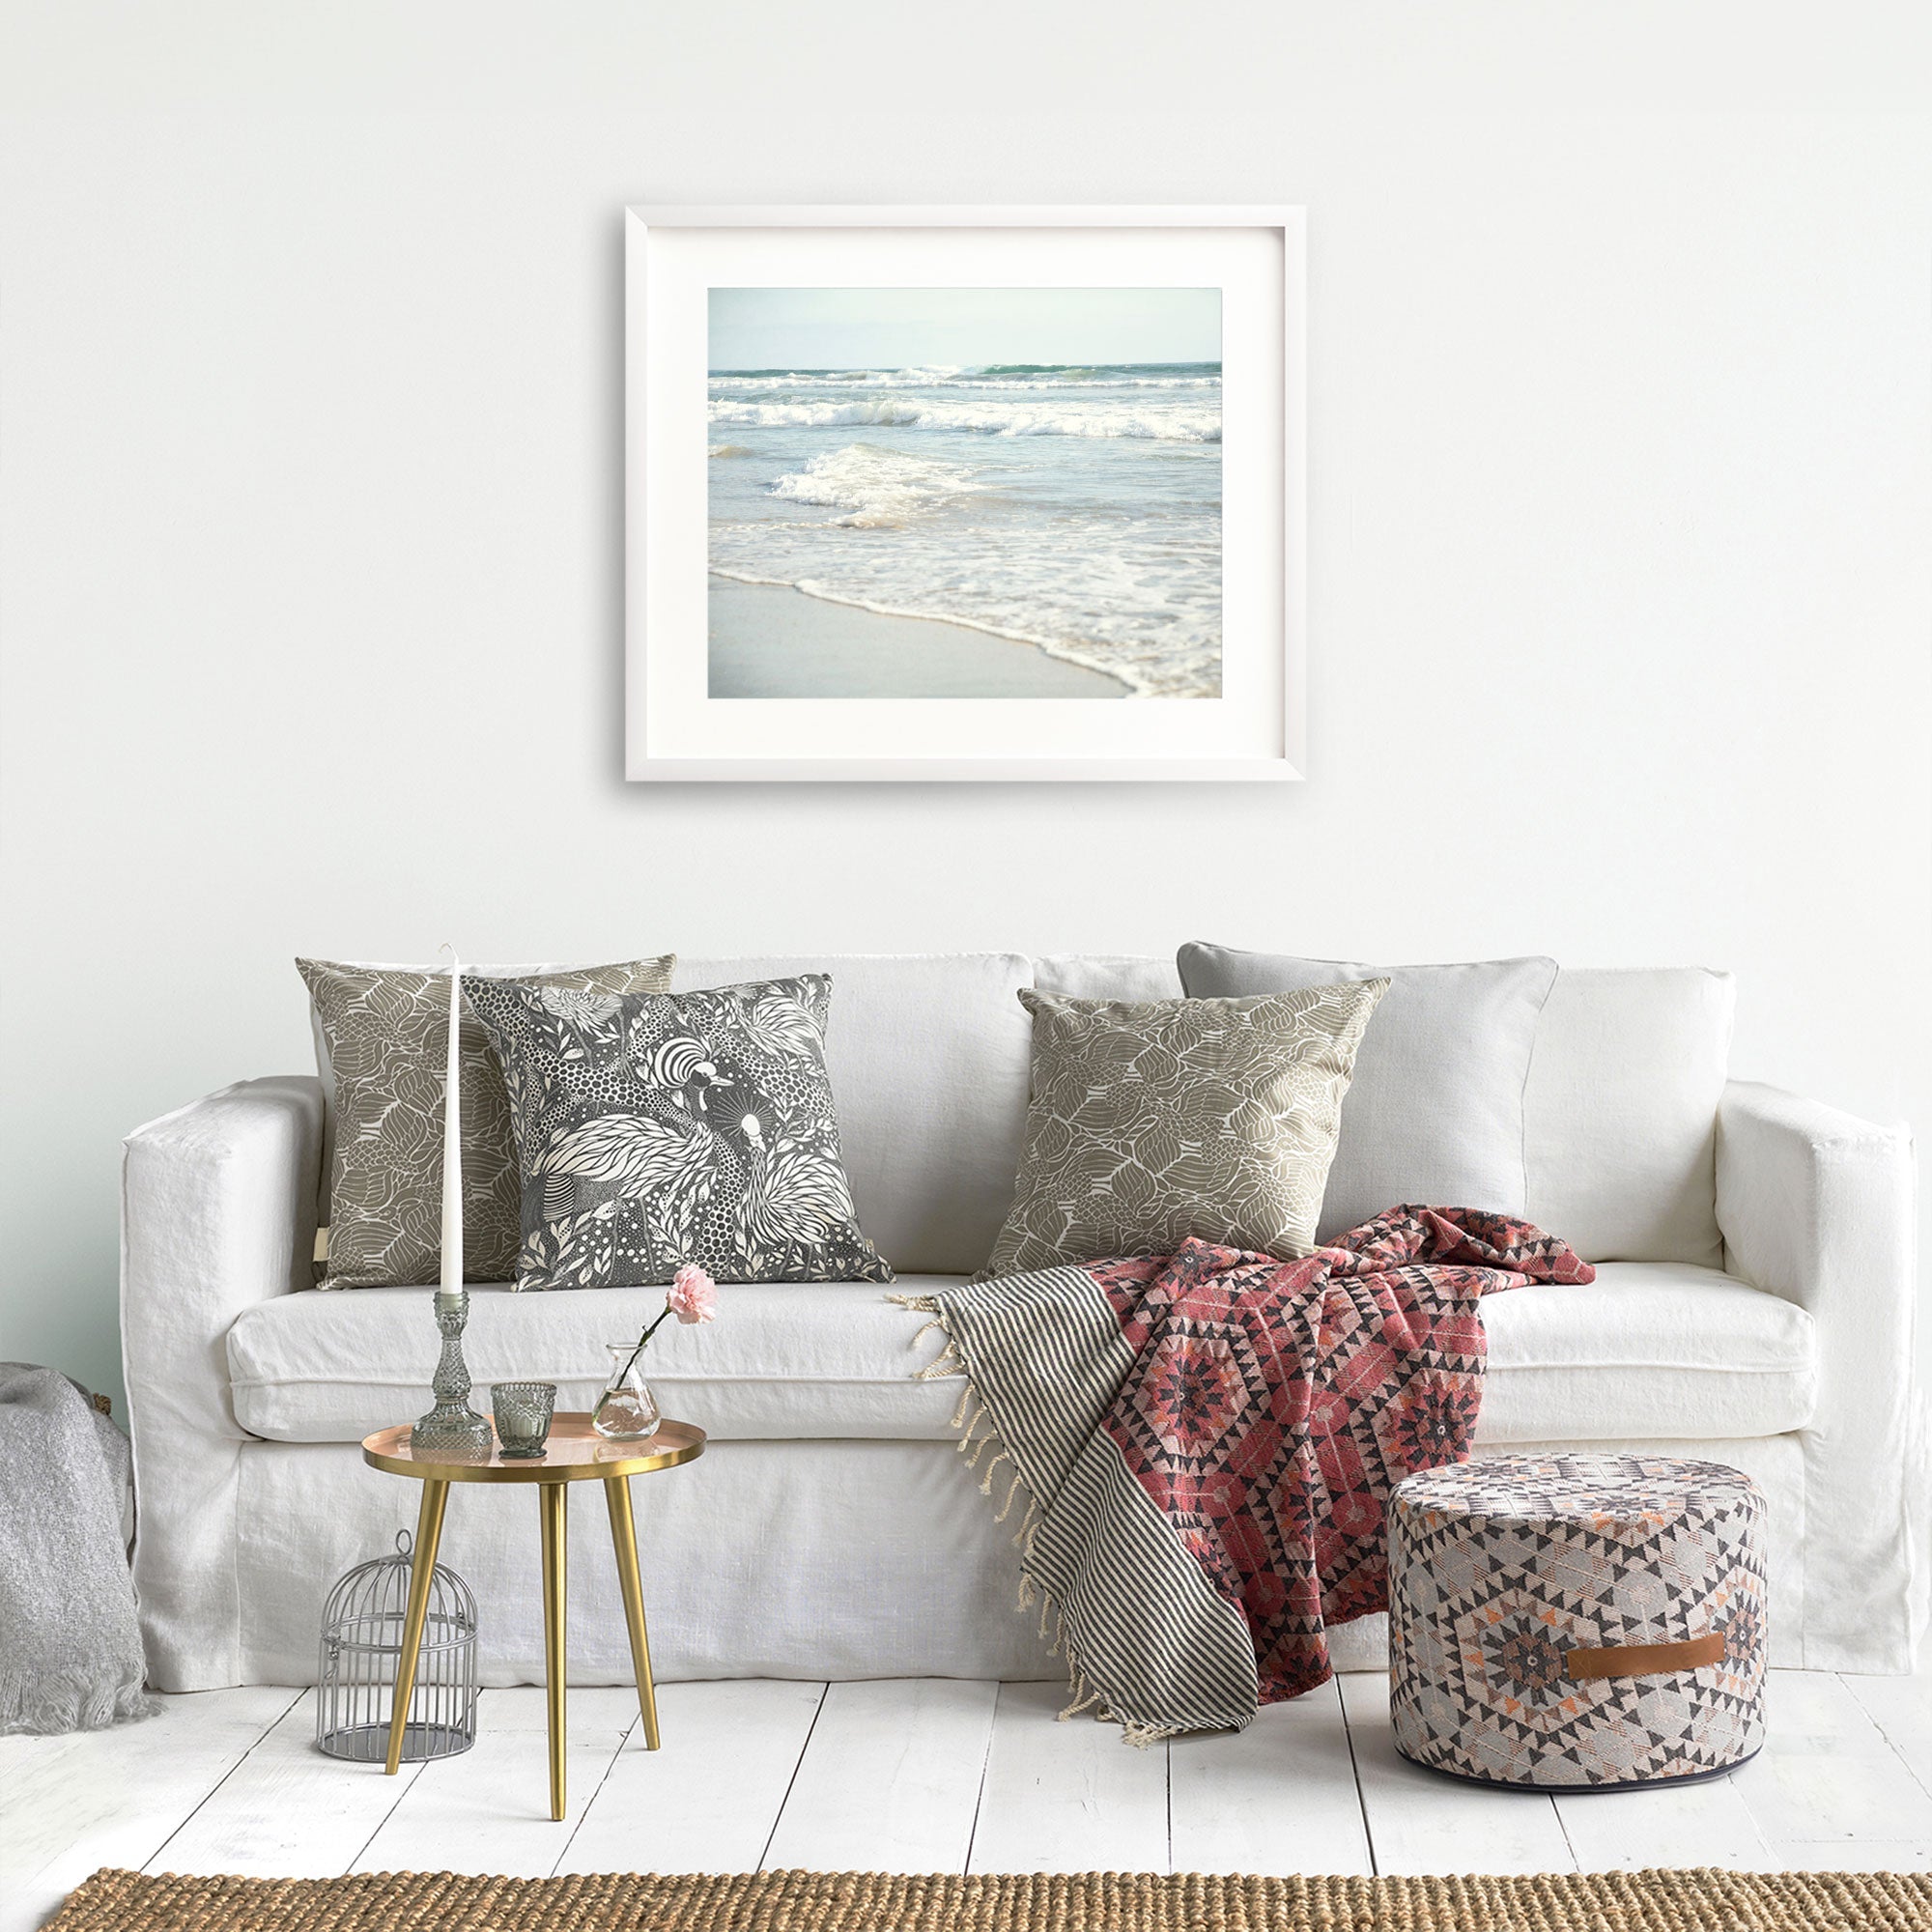 A cozy living room setup with a white Offley Green sofa adorned with the Coastal Beach Print in California 'Surf and Sun' patterned cushions, a small gold side table, a wicker ottoman with a pink flower on top, and a gray cage on the floor.